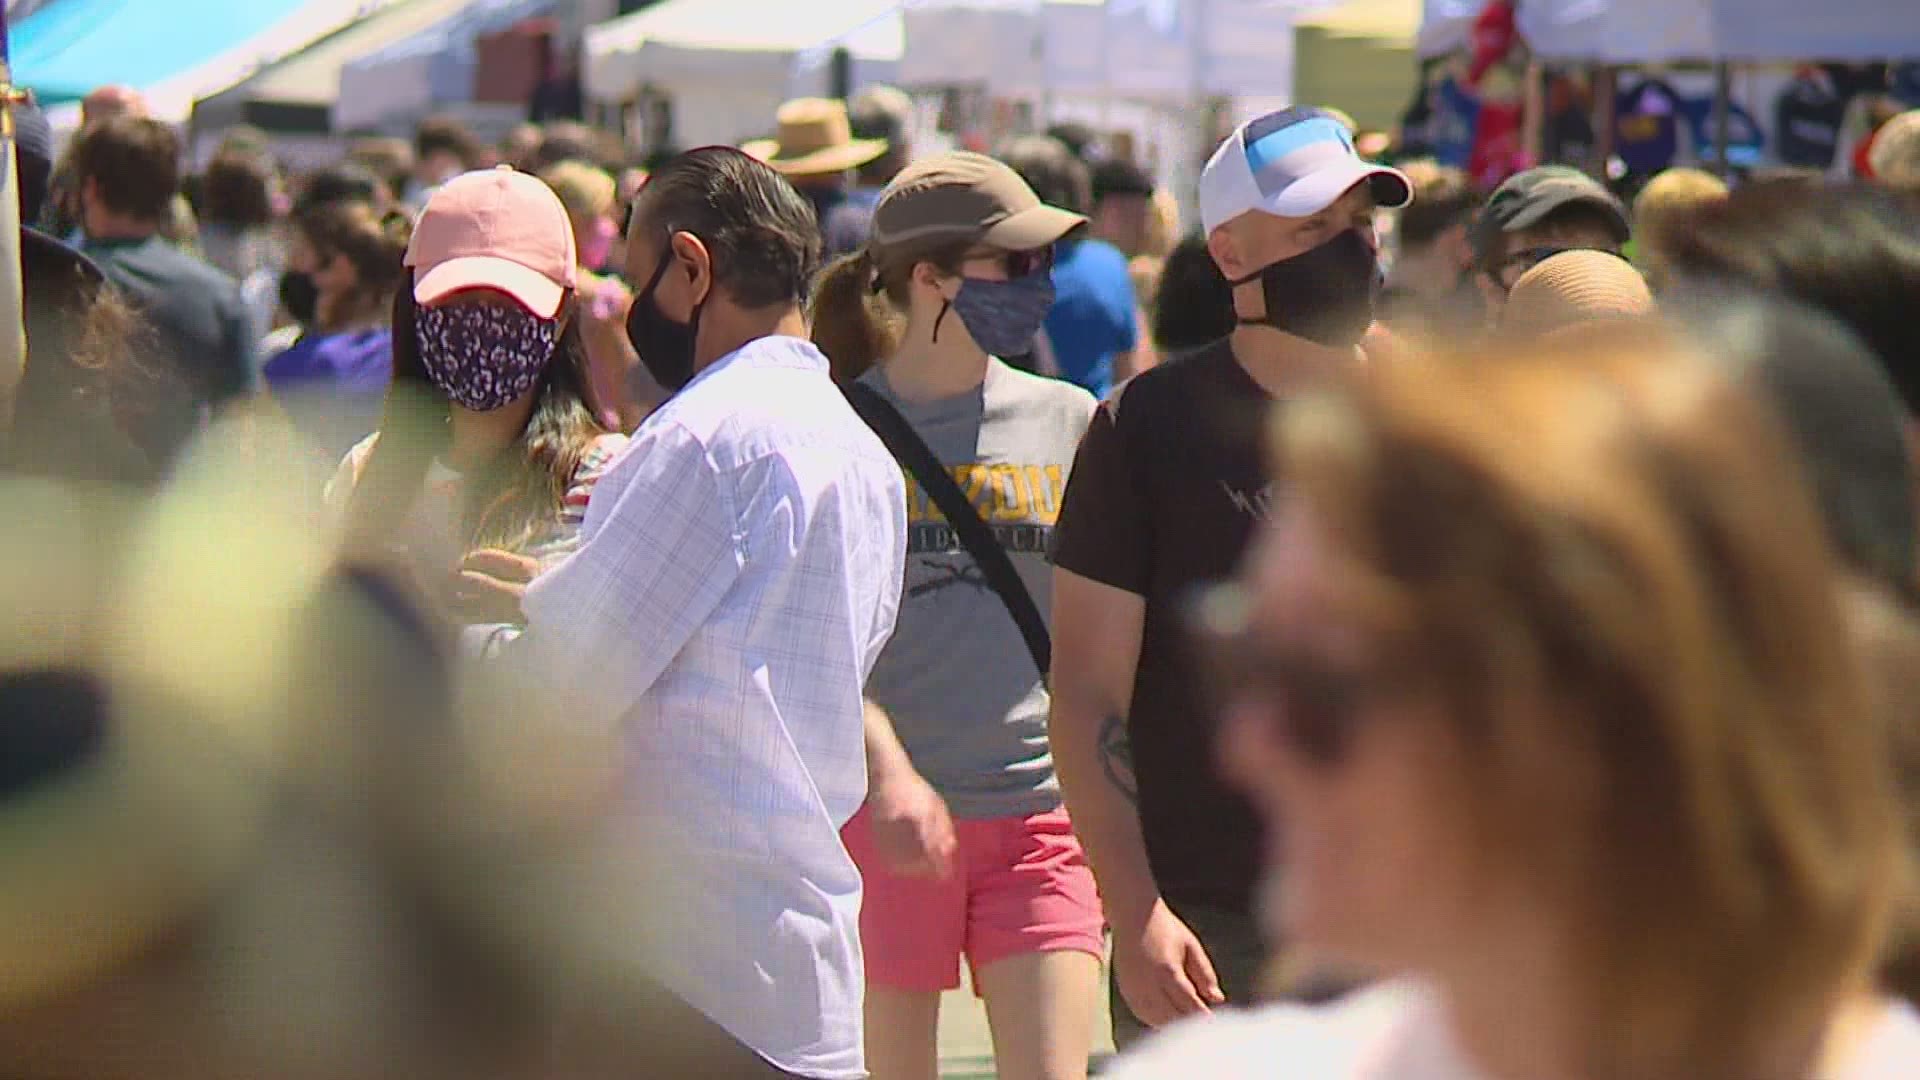 Fremont's Sunday Market drew a large crowd on the day of the summer Solstice.